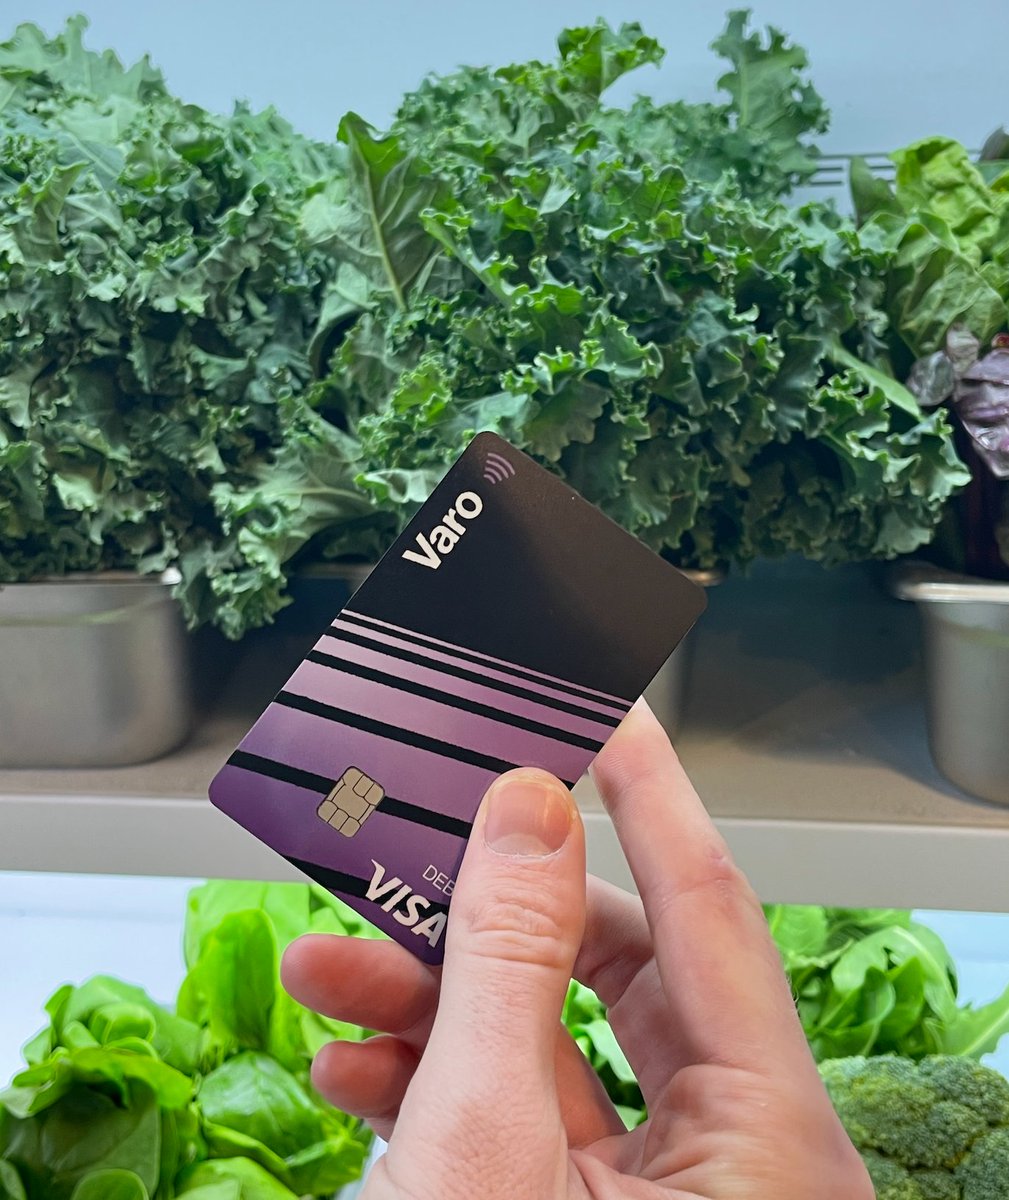 How long can we keep up this healthy new years resolution? 😤 Member FDIC. The Varo Visa® Debit Card is issued by Varo Bank, N.A. pursuant to a license from Visa U.S.A. Inc and may be used everywhere Visa debit cards are accepted. Member FDIC.